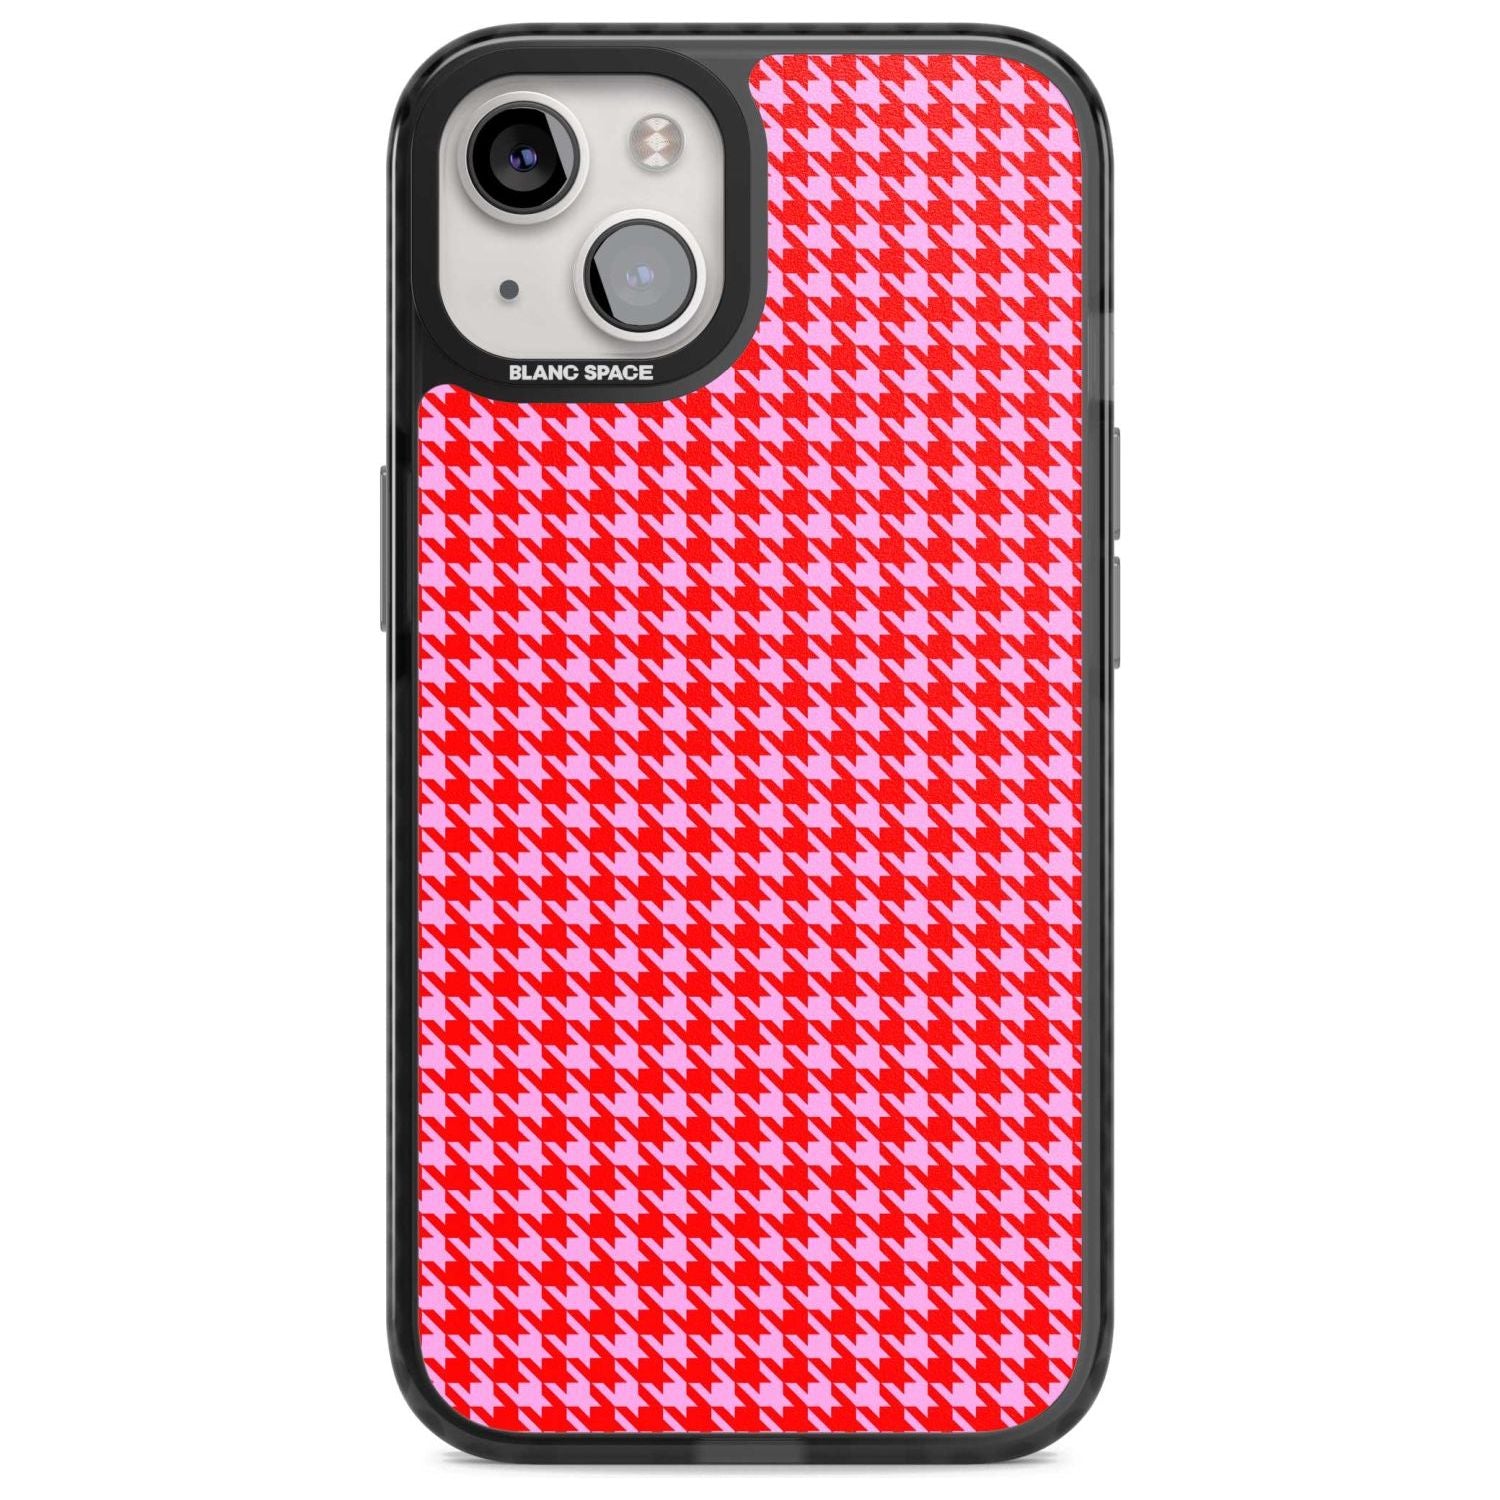 Neon Pink & Red Houndstooth Pattern Phone Case iPhone 15 Plus / Magsafe Black Impact Case,iPhone 15 / Magsafe Black Impact Case,iPhone 14 Plus / Magsafe Black Impact Case,iPhone 14 / Magsafe Black Impact Case,iPhone 13 / Magsafe Black Impact Case Blanc Space